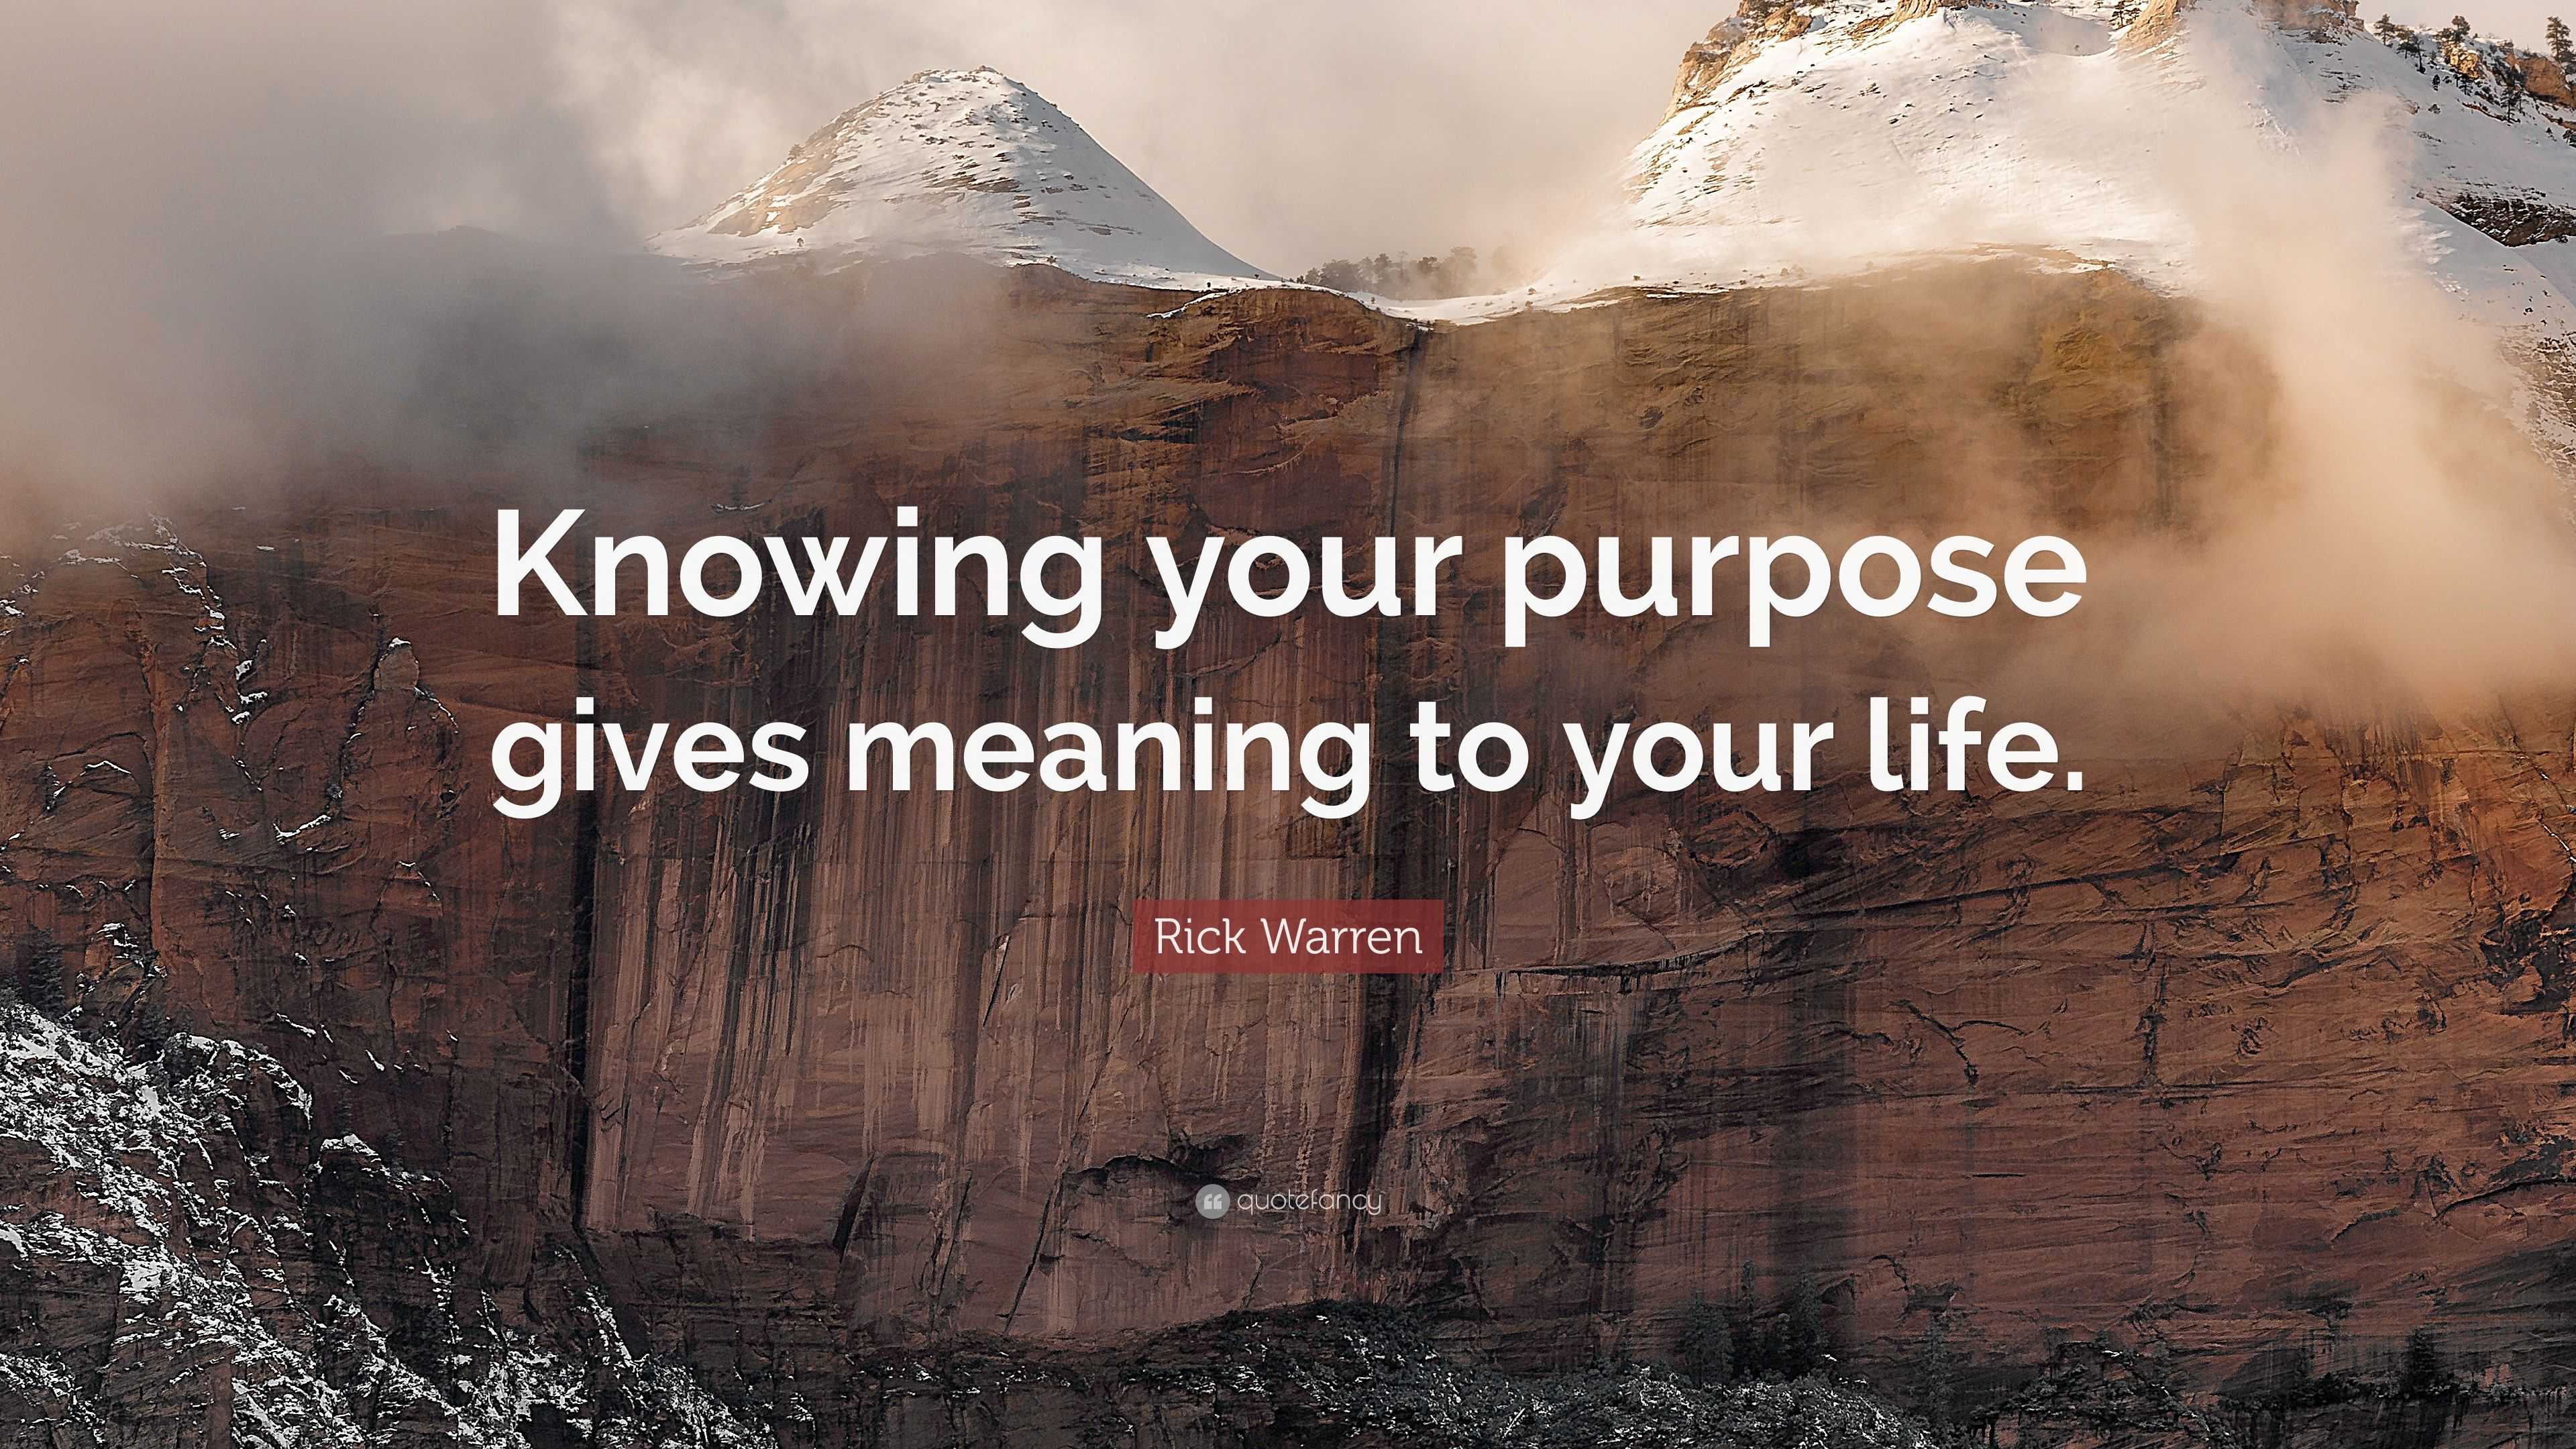 4777320 Rick Warren Quote Knowing your purpose gives meaning to your life